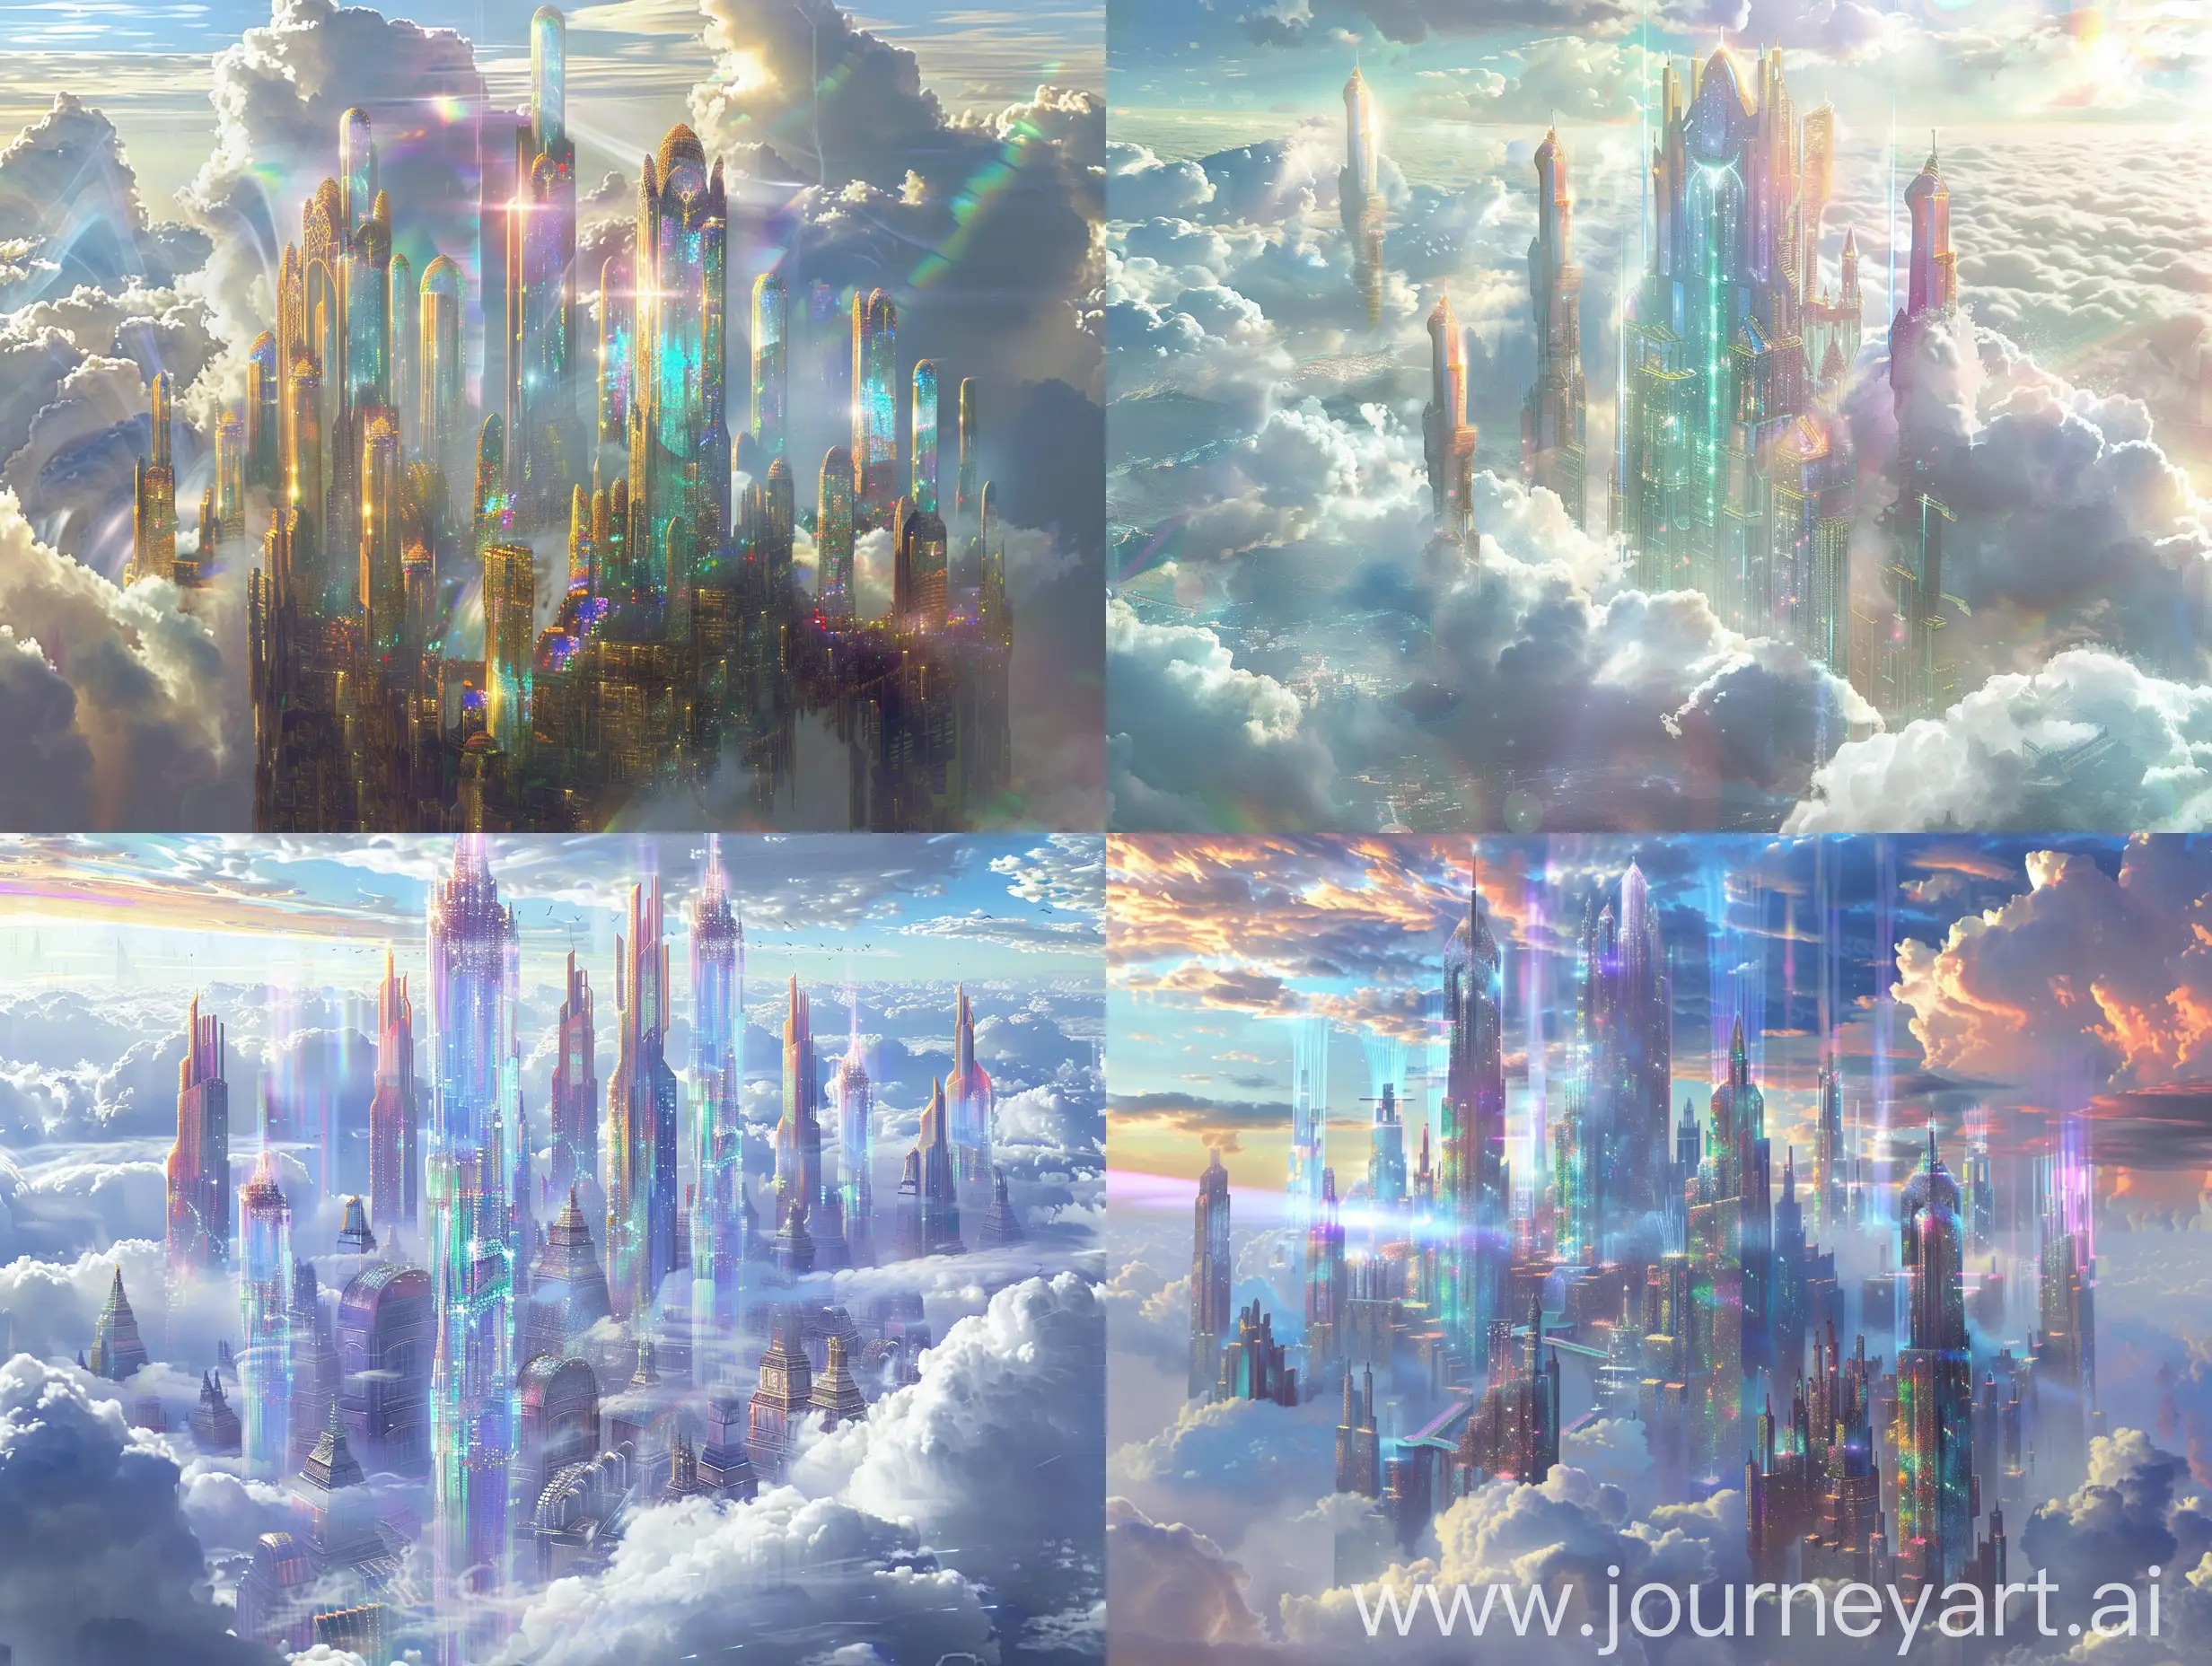 Ethereal-Metropolis-Among-Cotton-Candy-Clouds-Iridescent-Towers-and-Glowing-Crystals